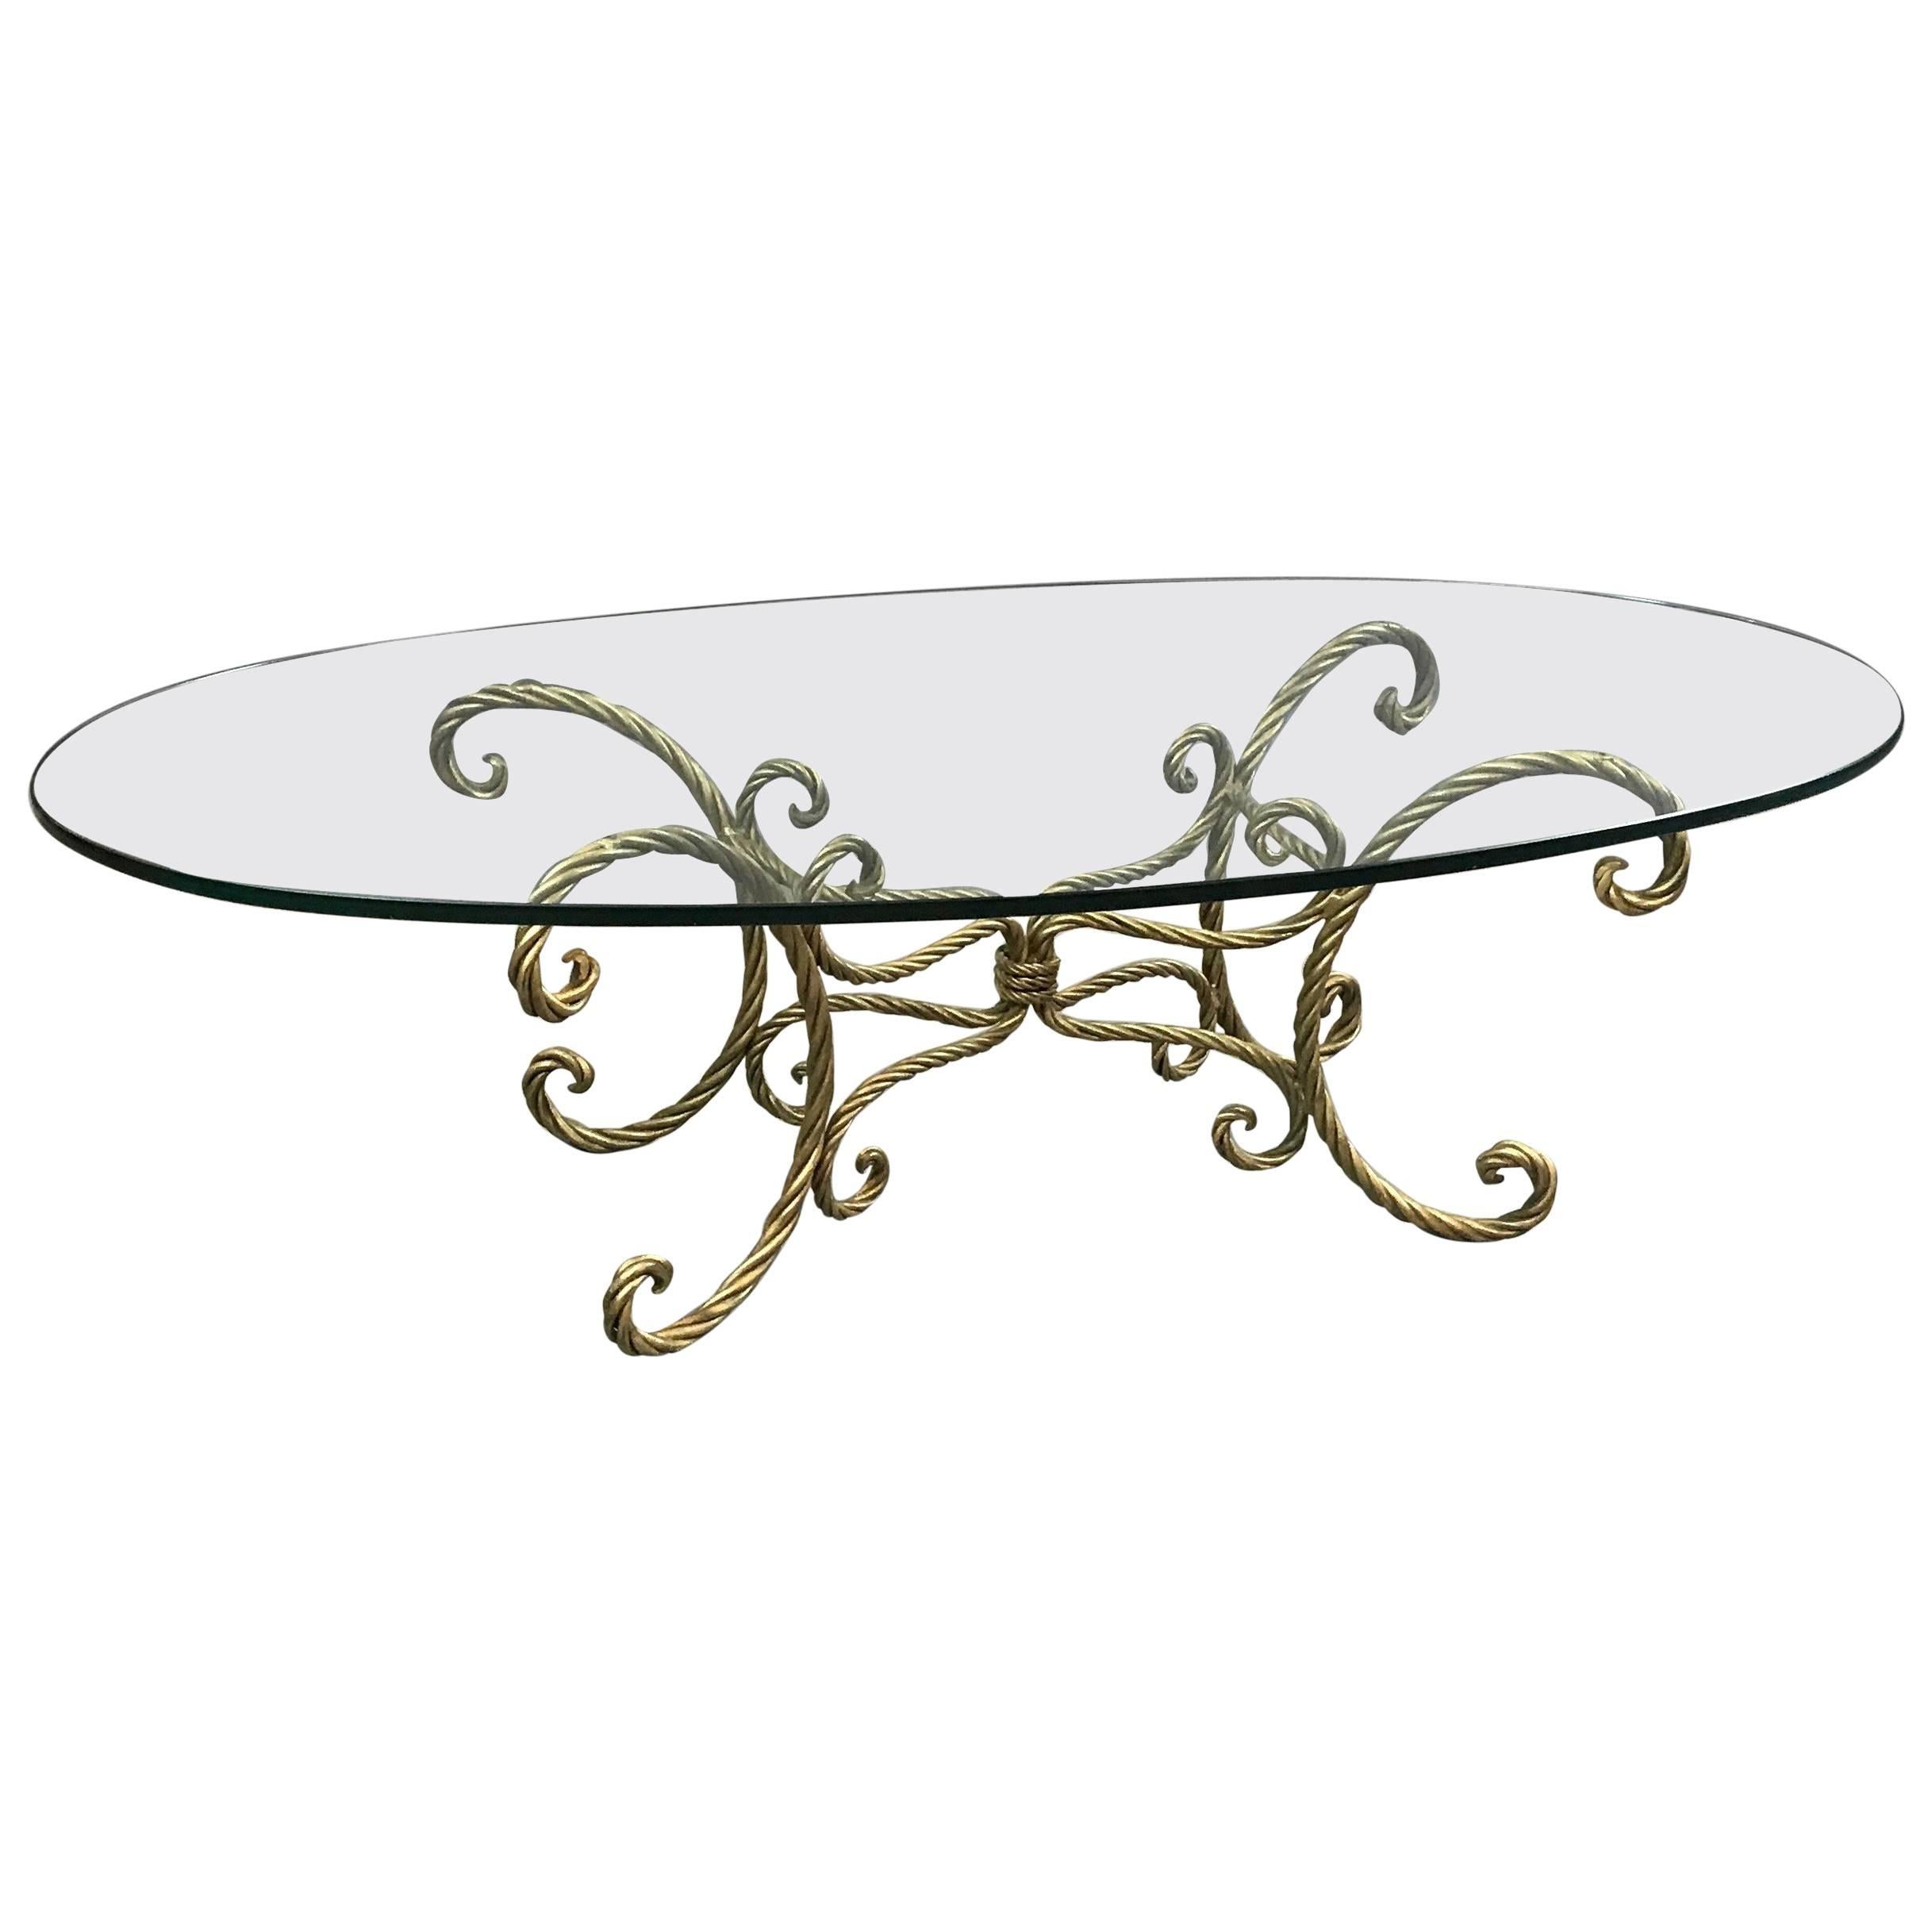 Italian Midcentury Gilt Braided Rope and Oval Glass Coffee Table For Sale